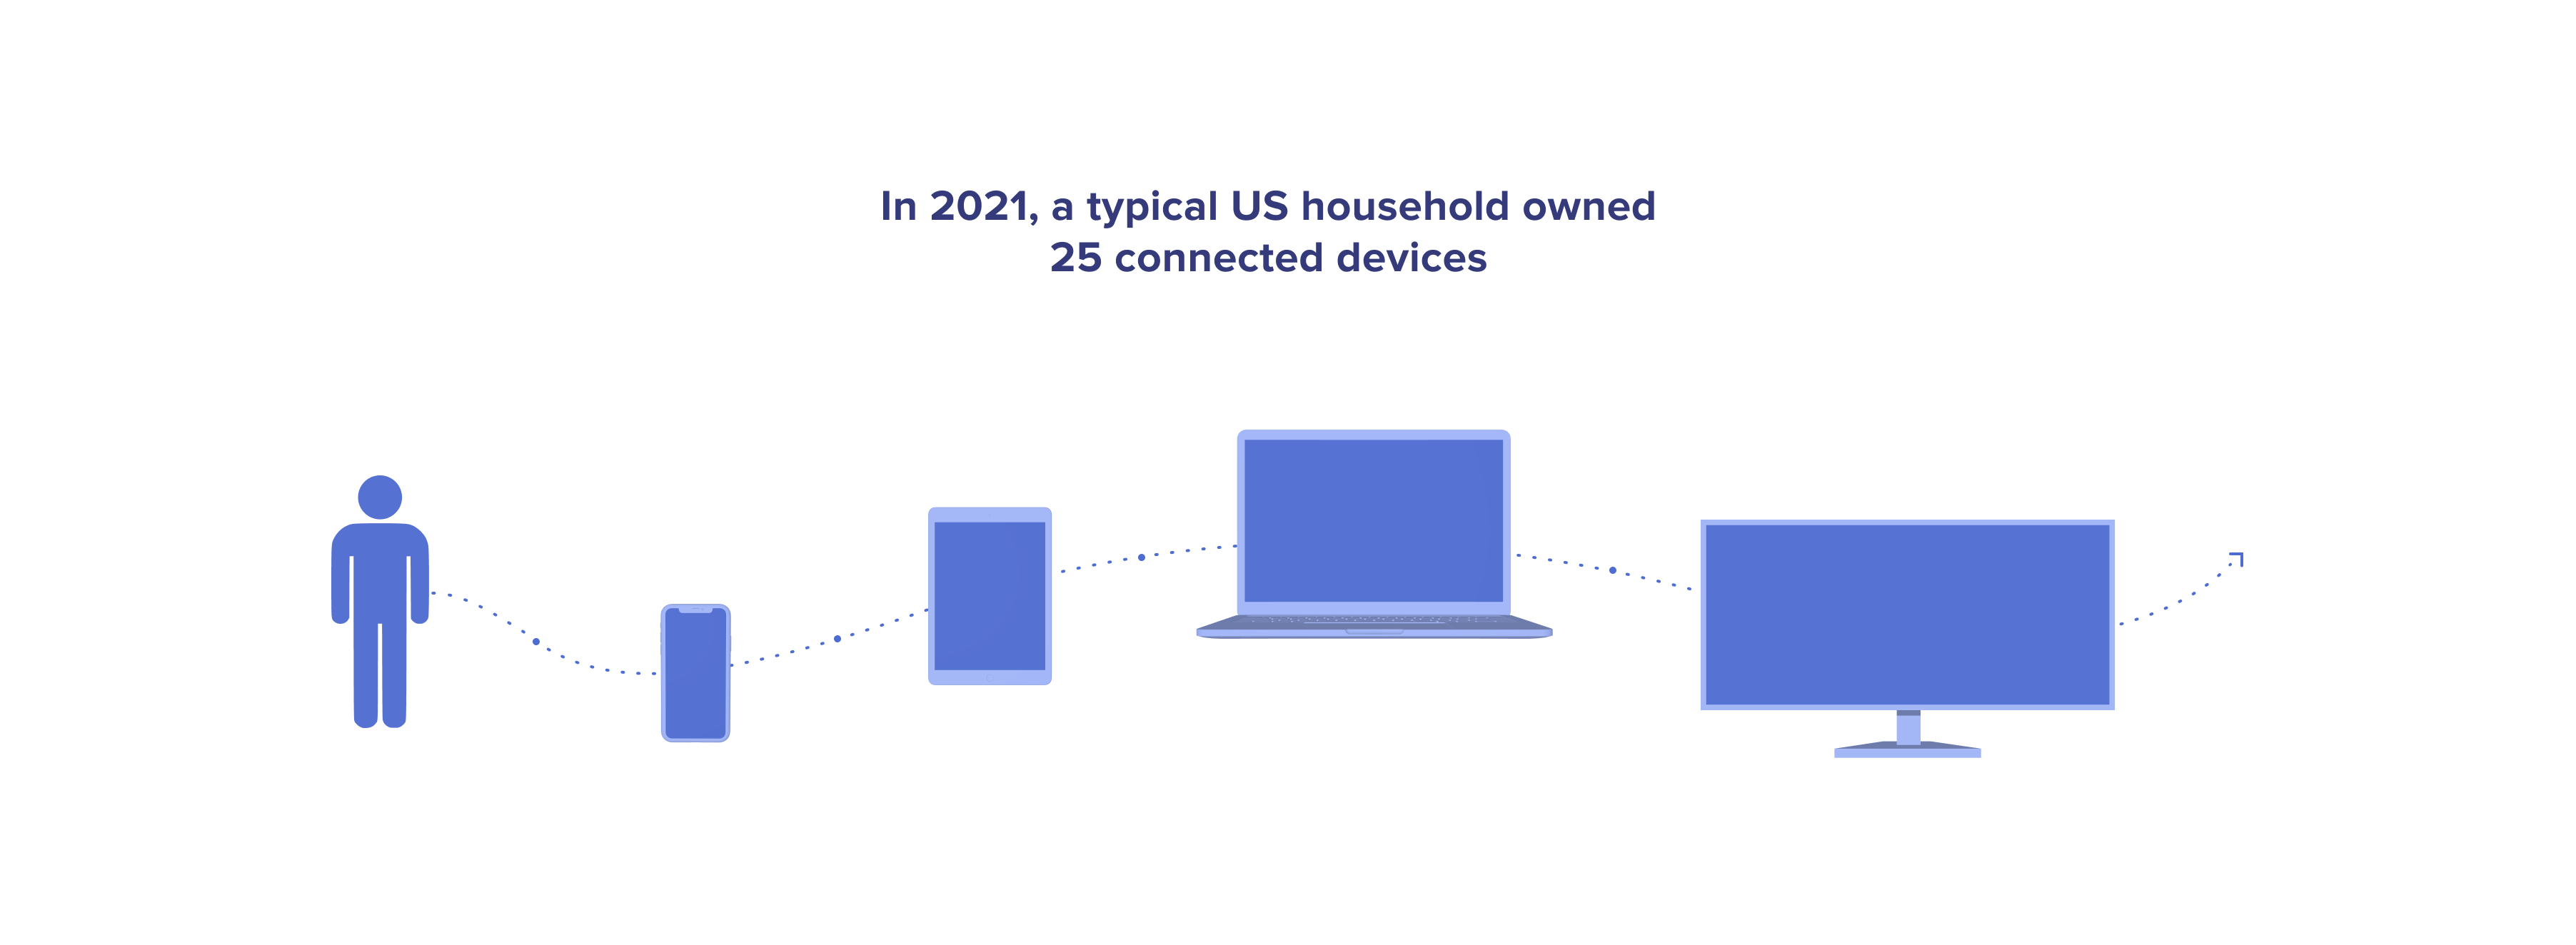 Cross-device attribution problems: a typical household in the US owned 25 devices in 2021